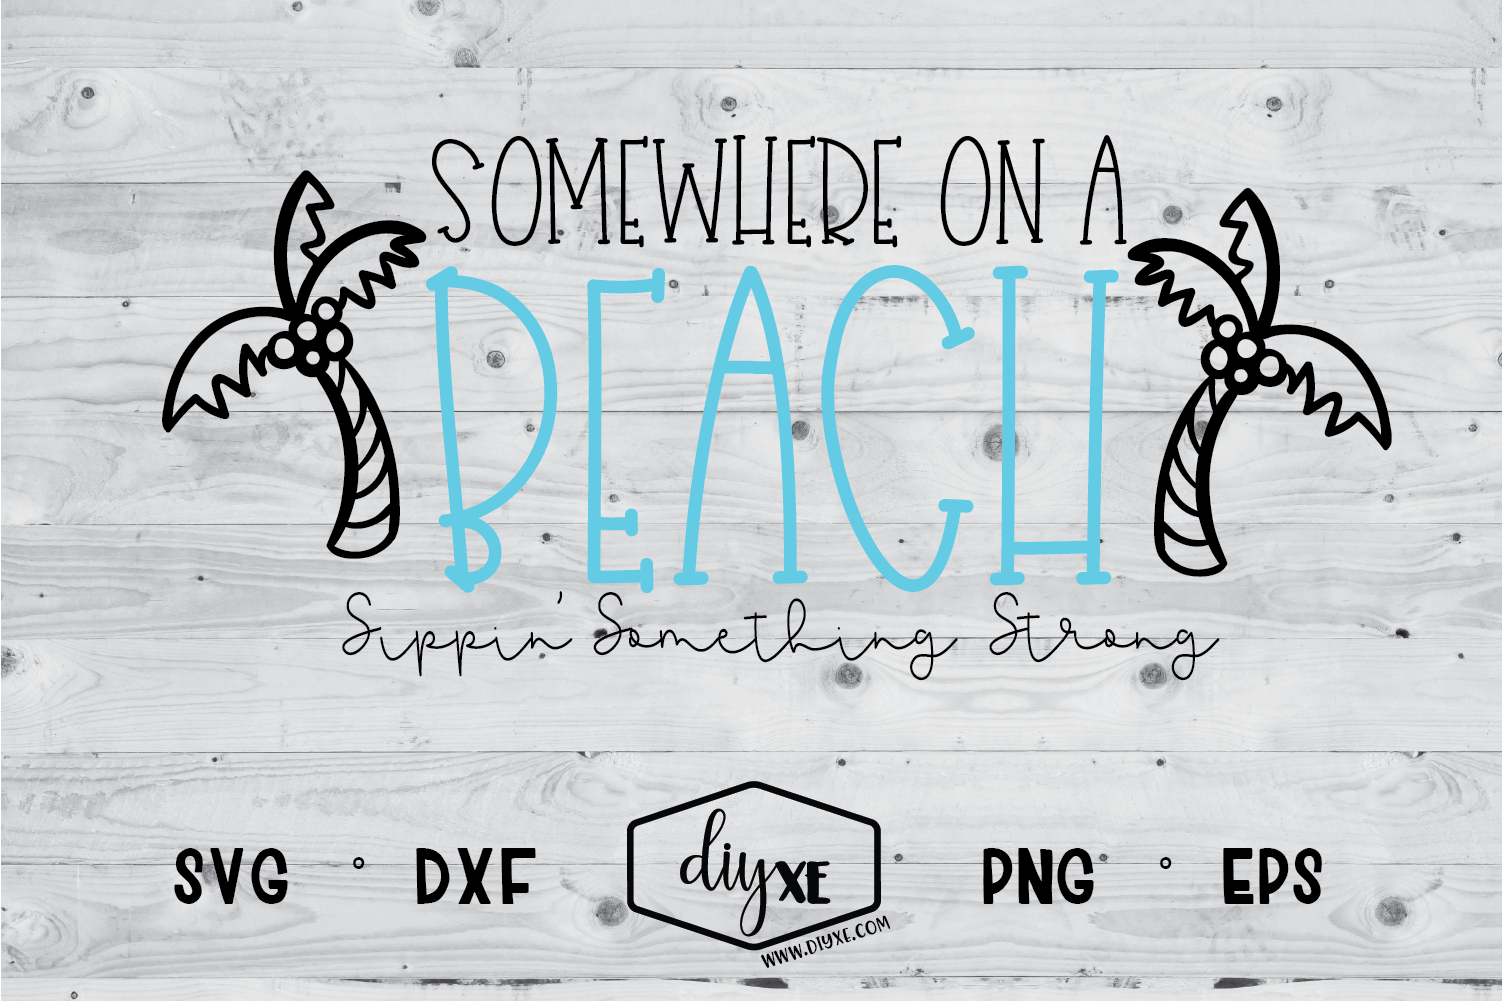 Download Free Somewhere On A Beach A Beach Svg Cut File 196999 Svgs SVG DXF Cut File